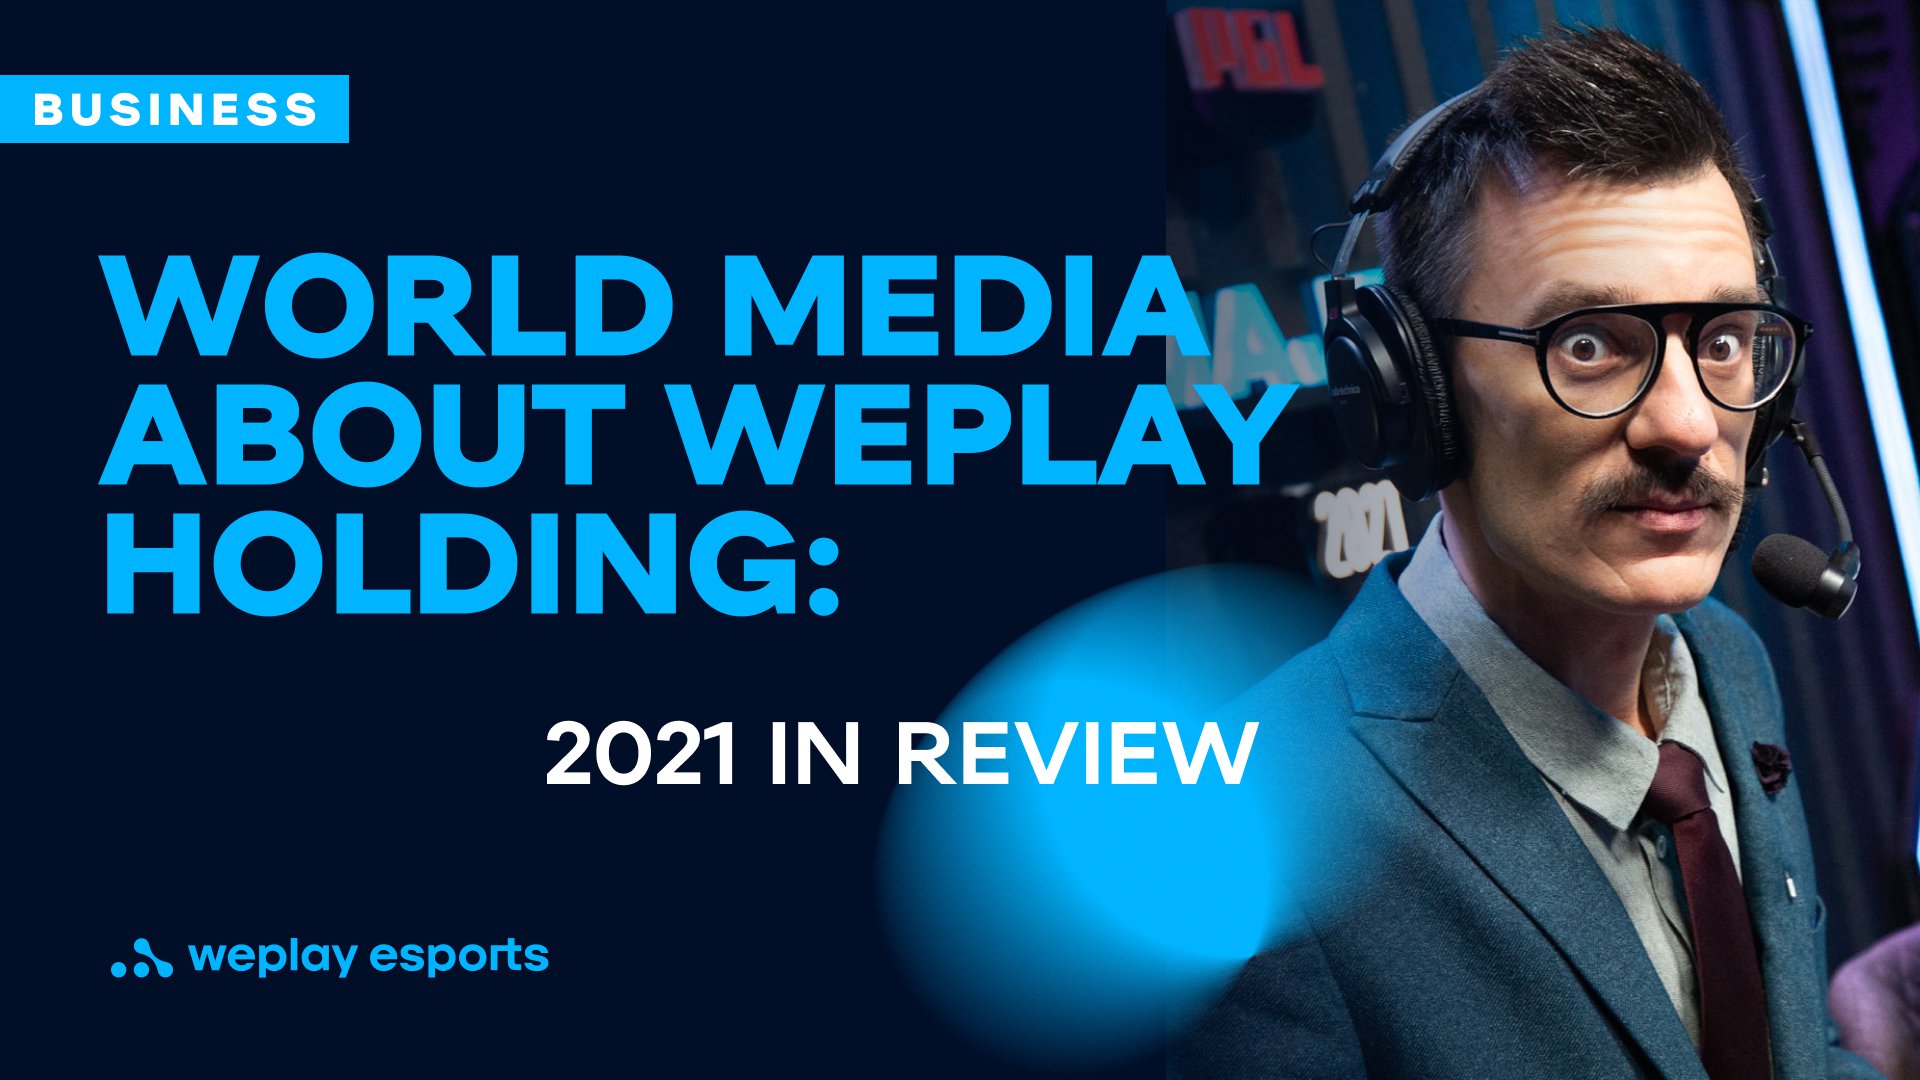 World media about WePlay Holding: 2021 in review